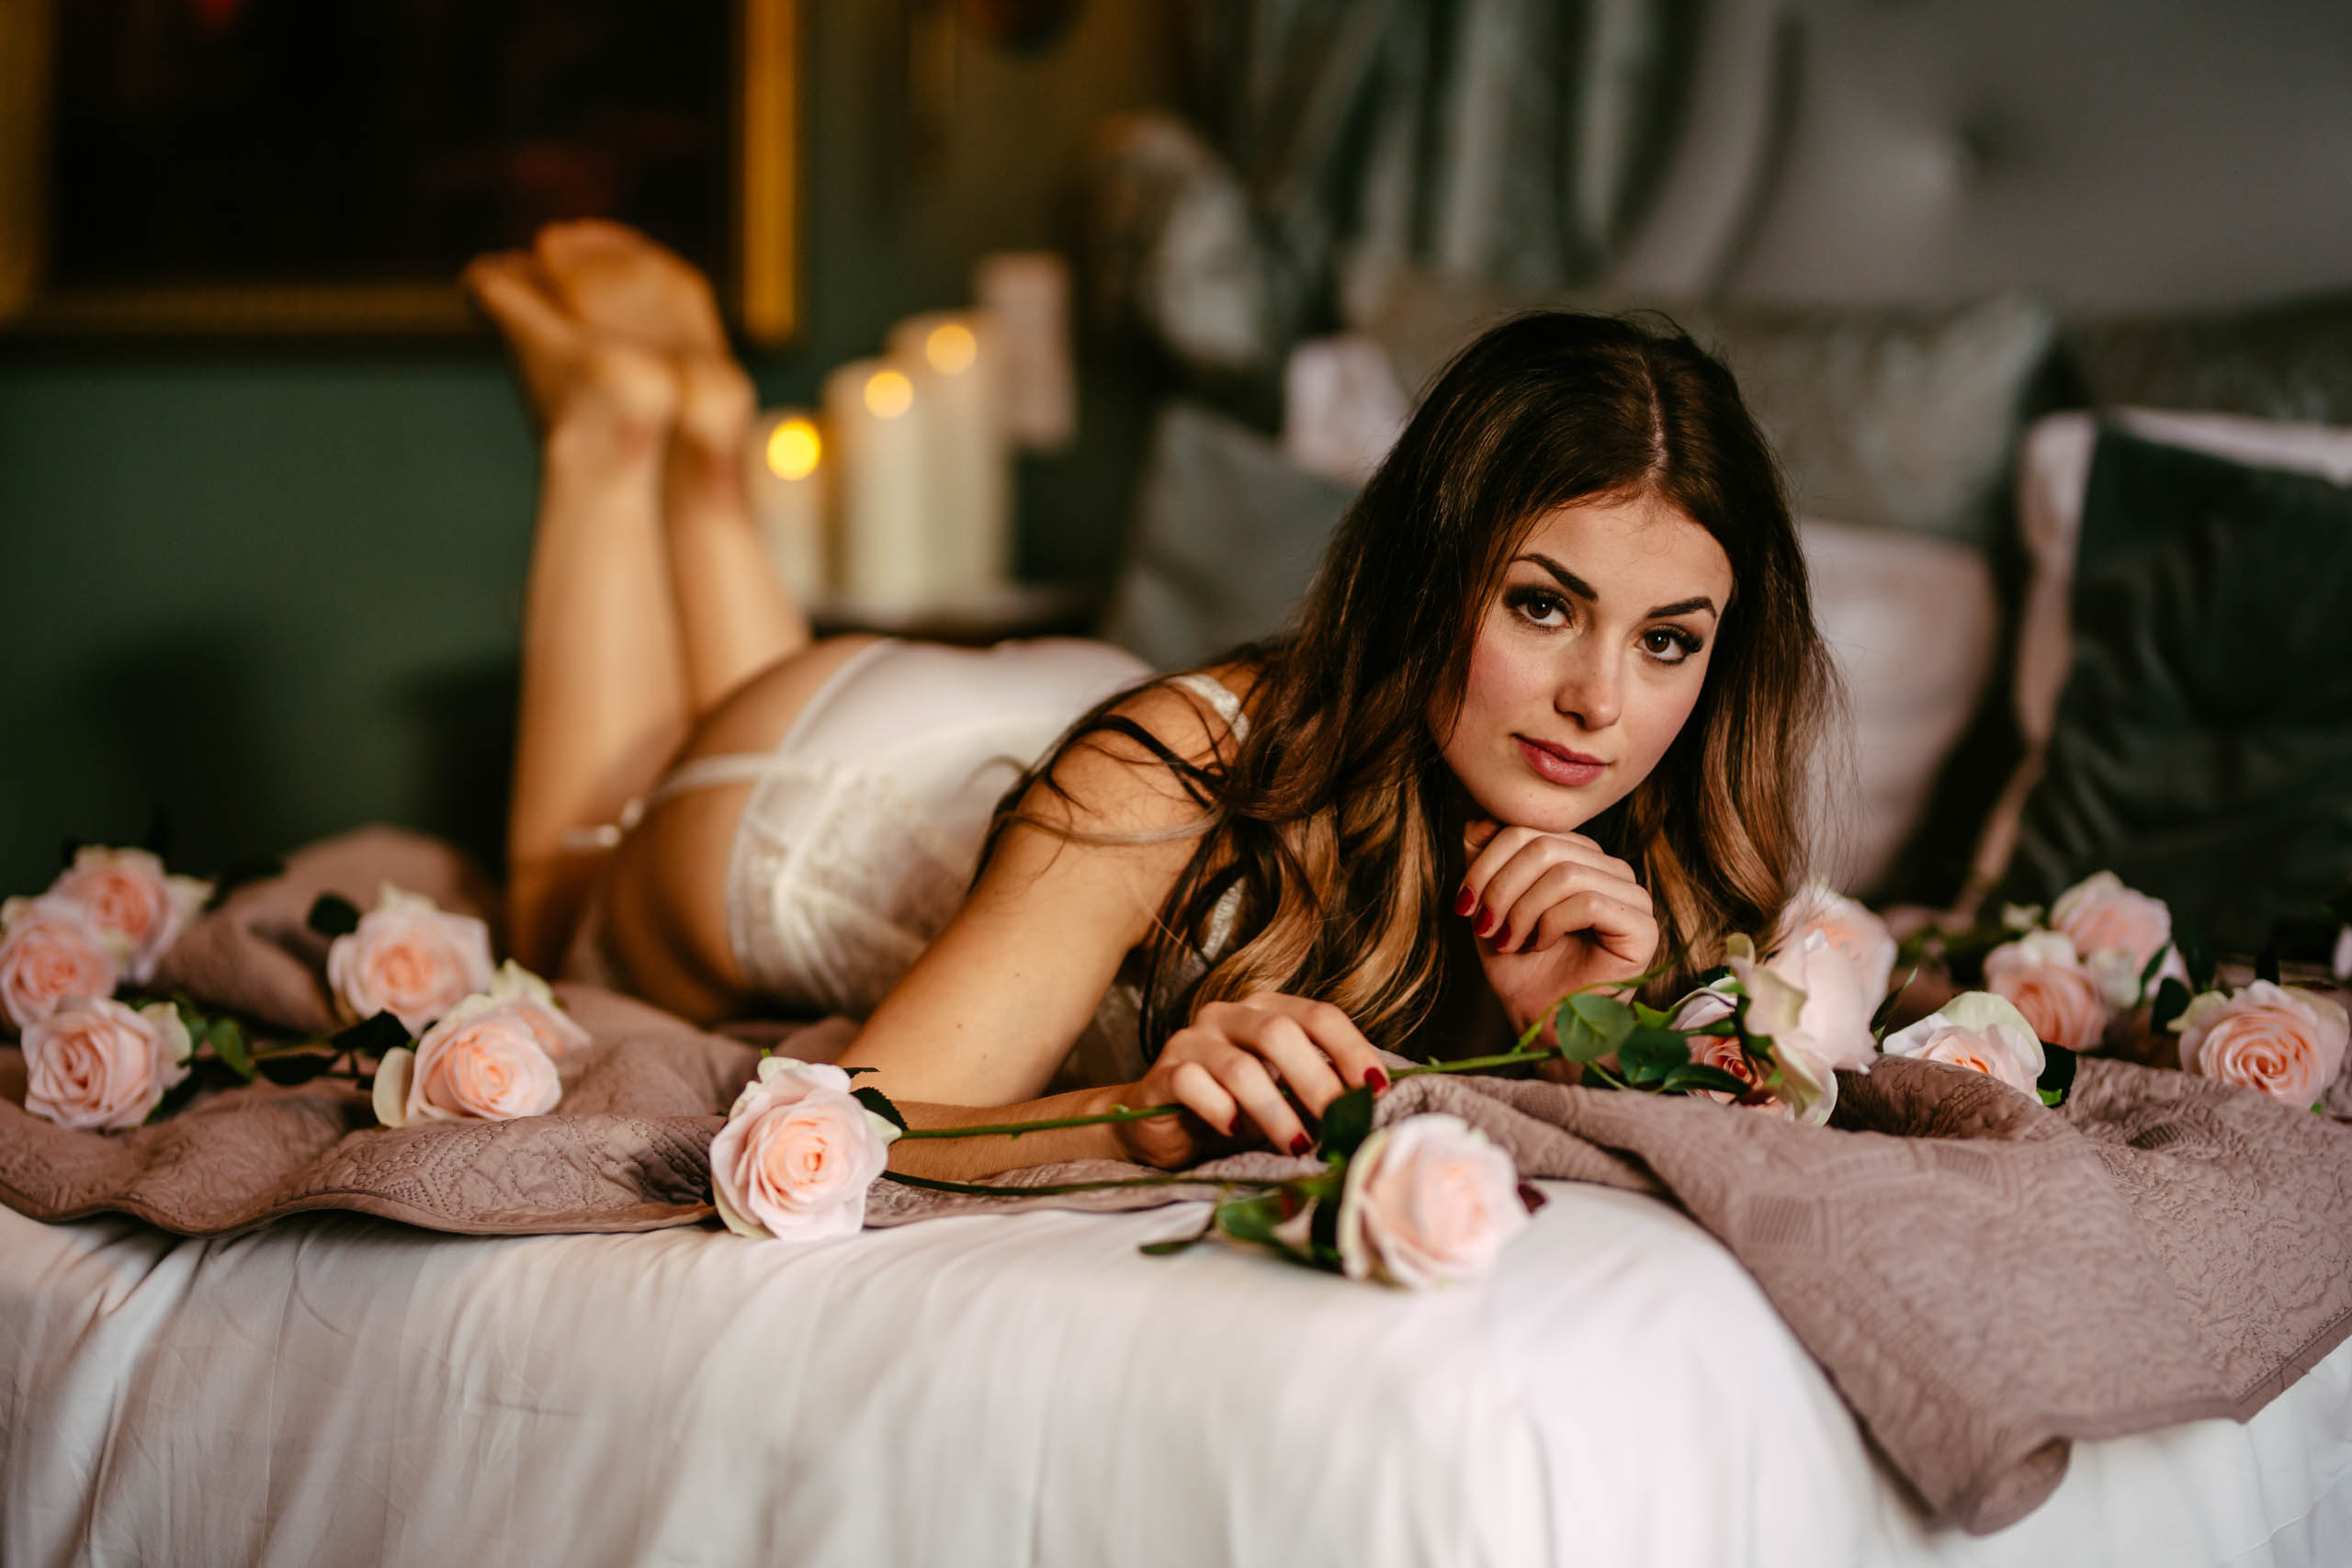 A boudoir shoot with a woman in lingerie surrounded by roses.